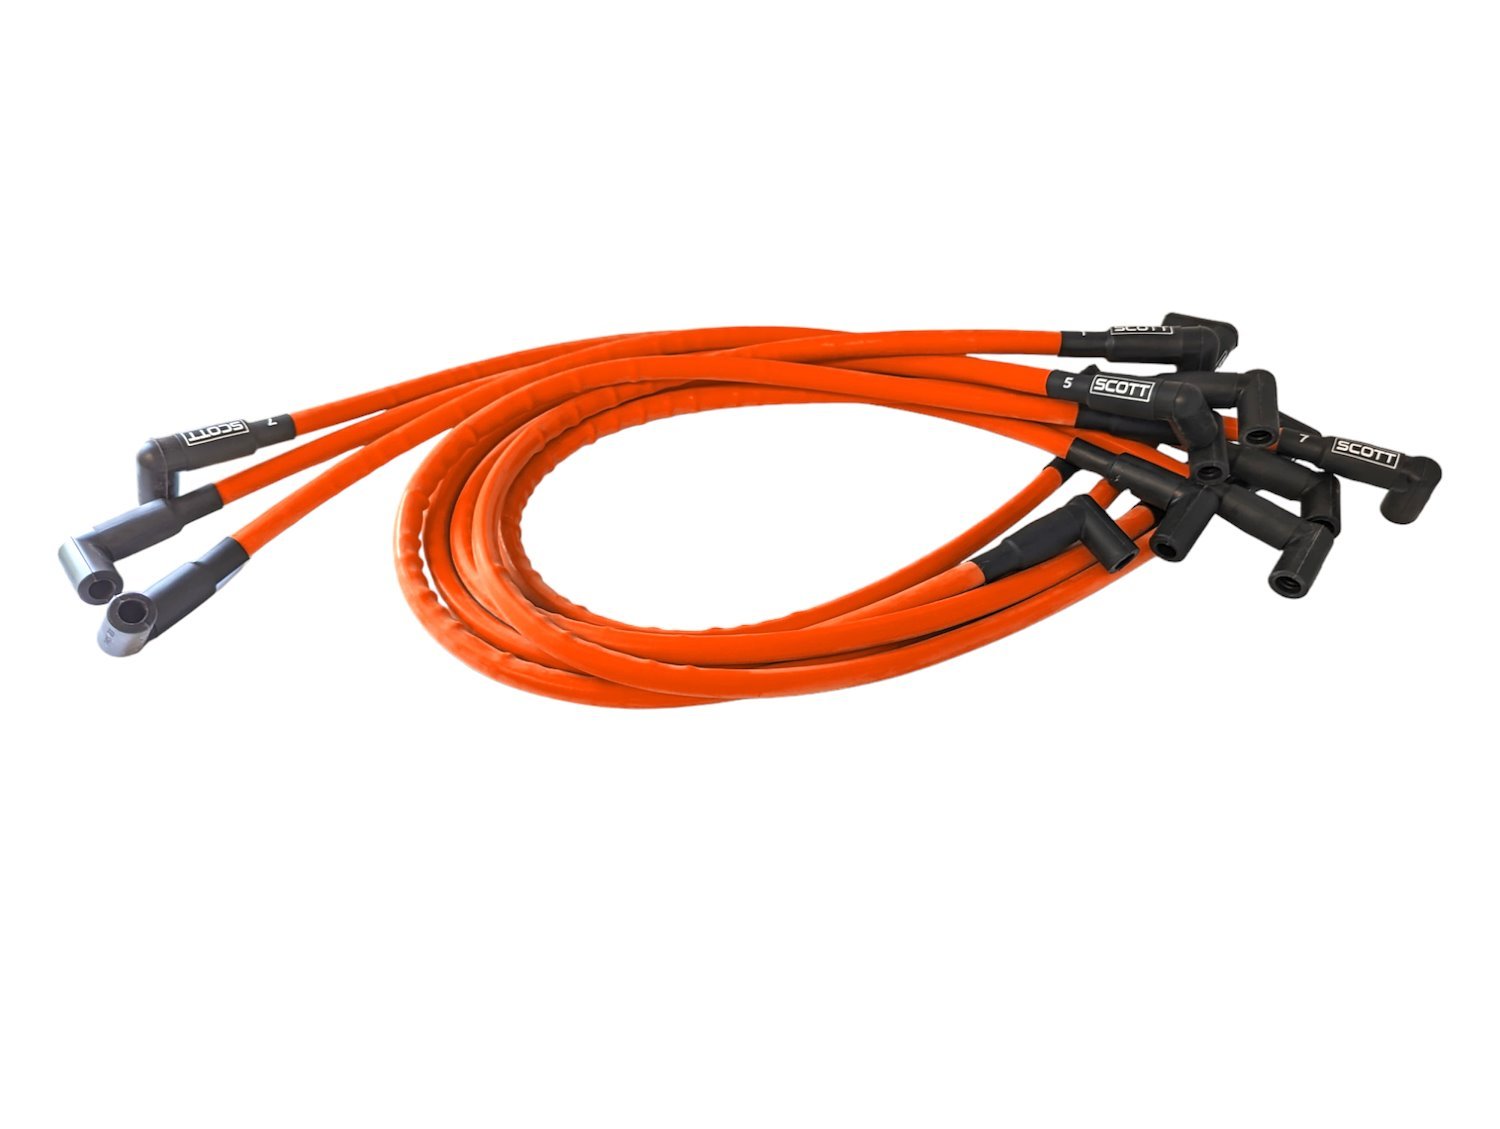 SPW300-CH-435-9 Super Mag Fiberglass-Oversleeved Spark Plug Wire Set for Small Block Chevy, Around Front [Orange]